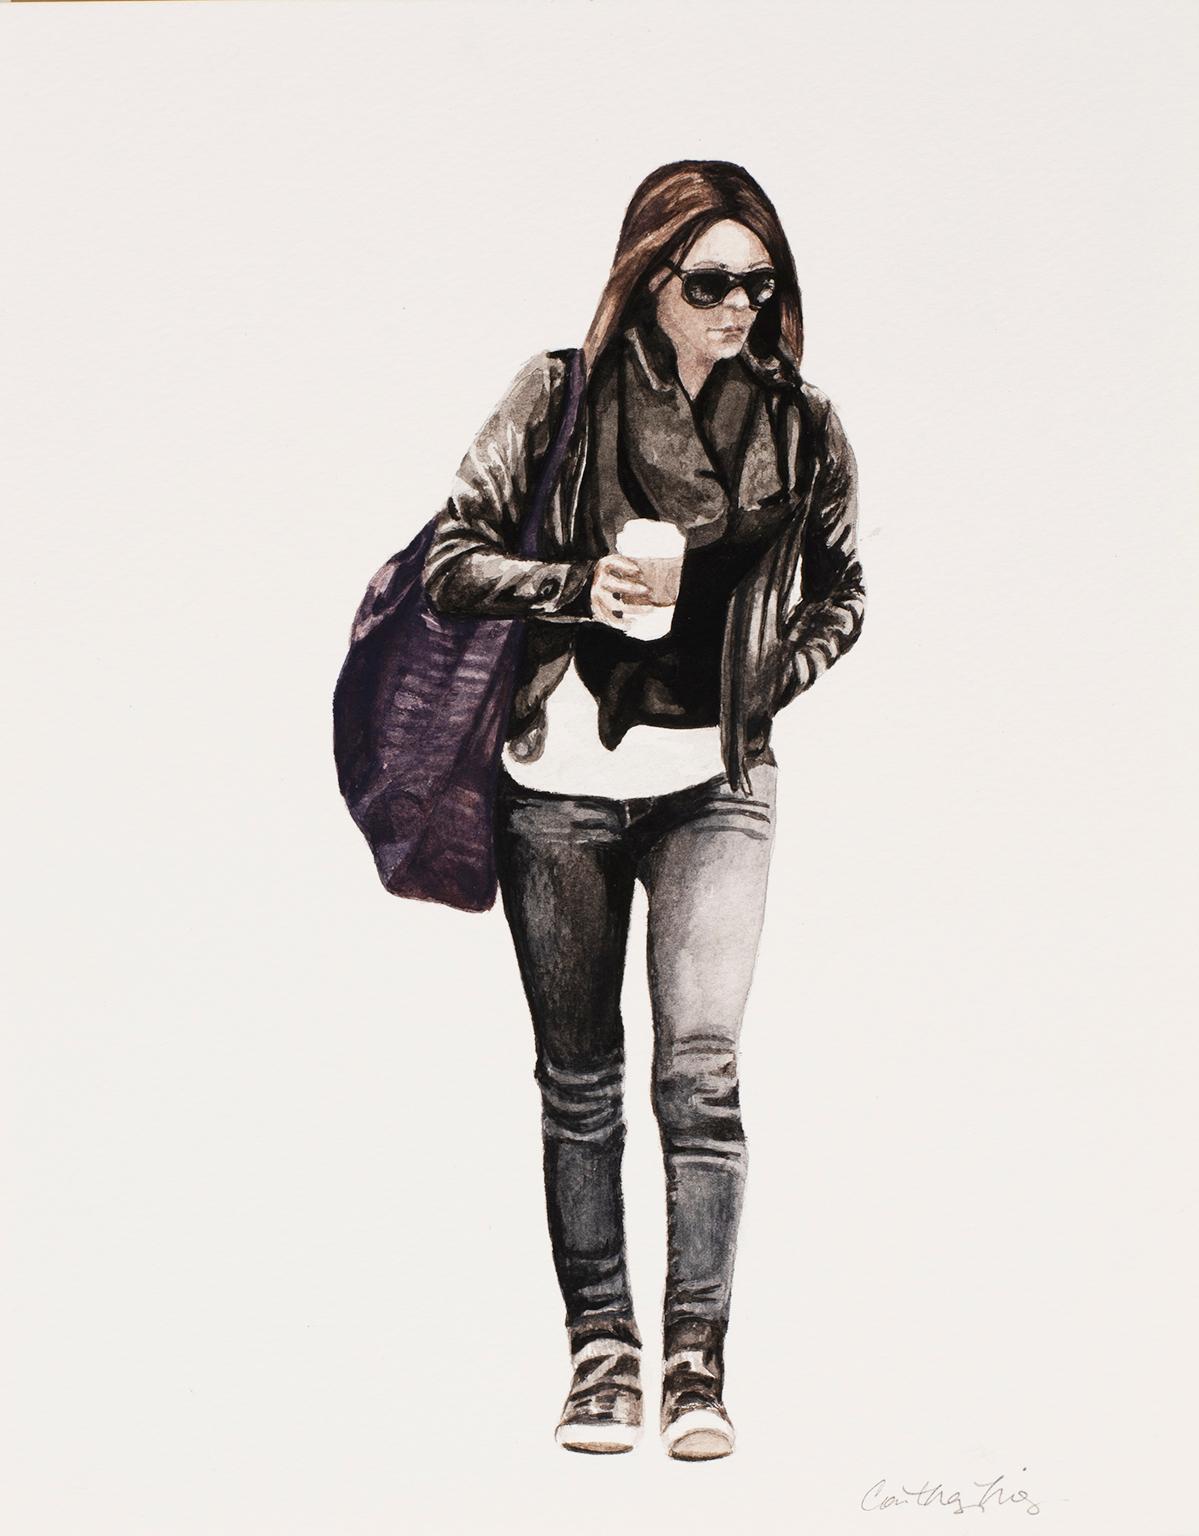 Courtney Incognito 029, Realist painting on paper. Brunette with black jacket - Black Figurative Art by Courtney Miles